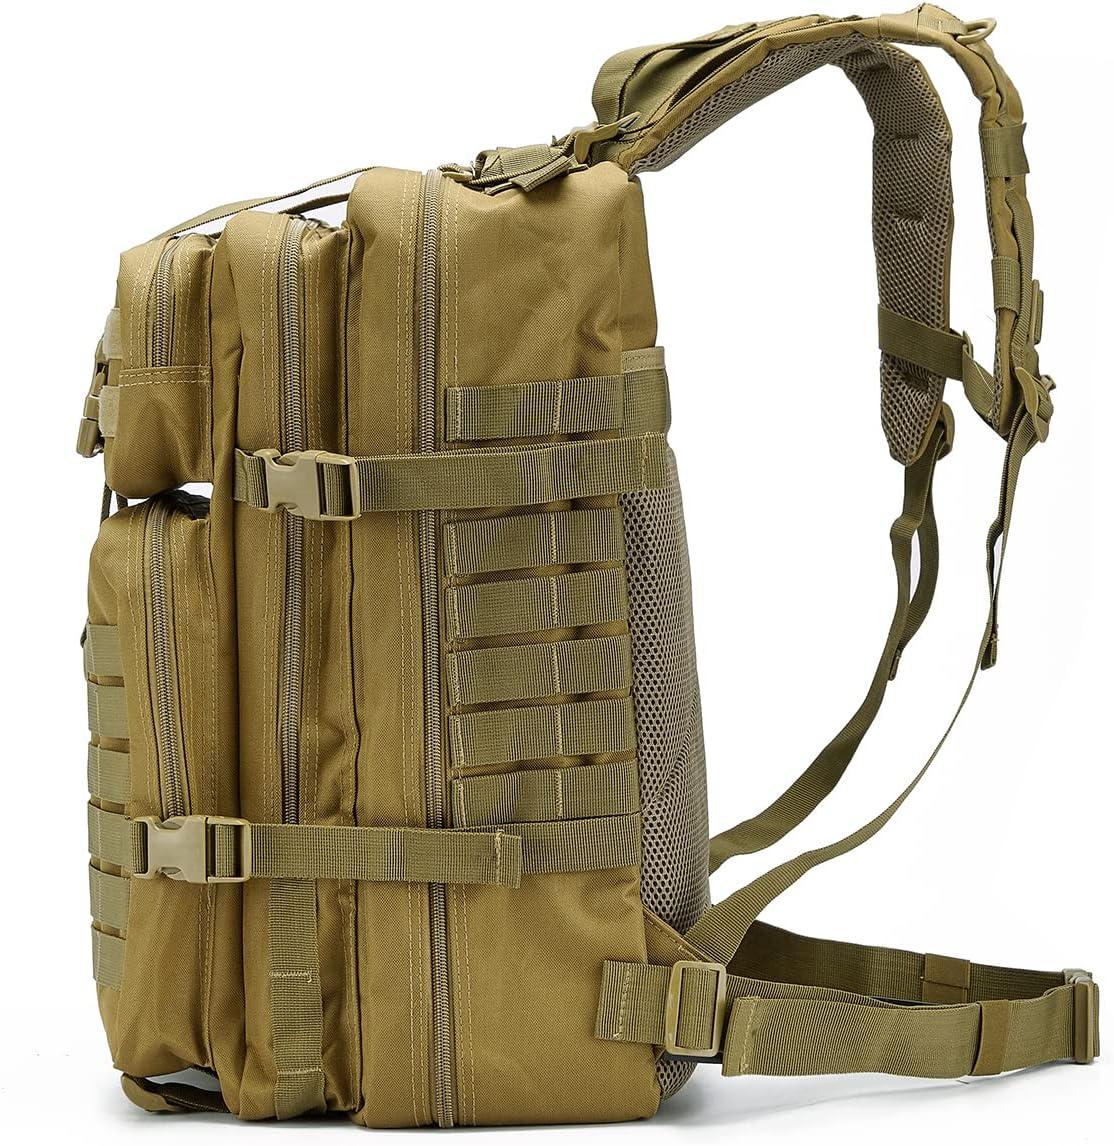 Link Military Backpack 45L Molle Army Tactical 3 Day Survival Waterproof  Outdoor Fishing Hiking Camping Bug Out Backpack 900D - Khaki